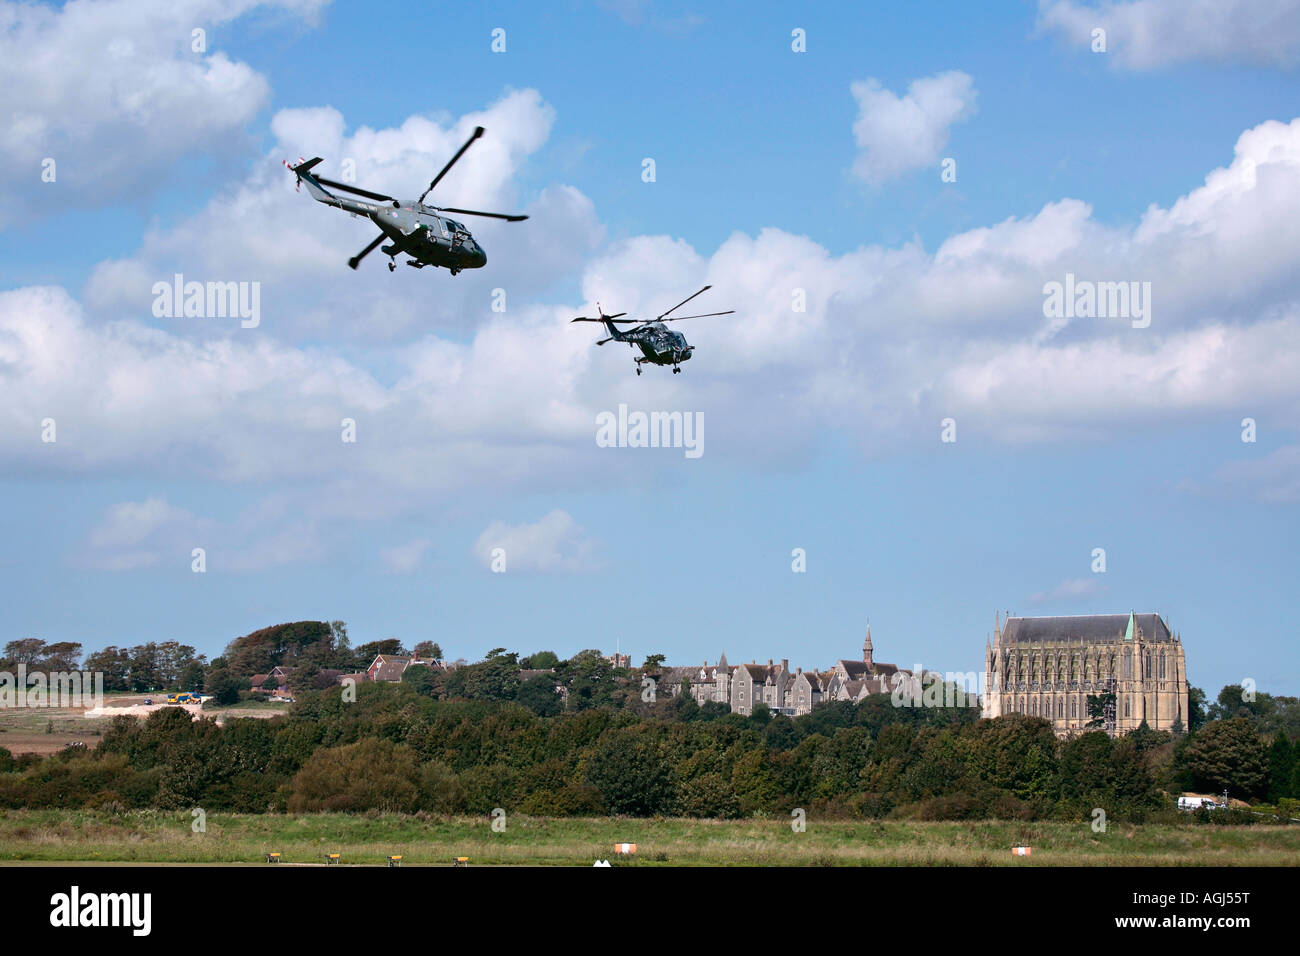 Royal Navy Black Cat helicopter aerobatic display (now 825 NAS) at Shoreham airshow, Shoreham Airport, West Sussex, England Stock Photo